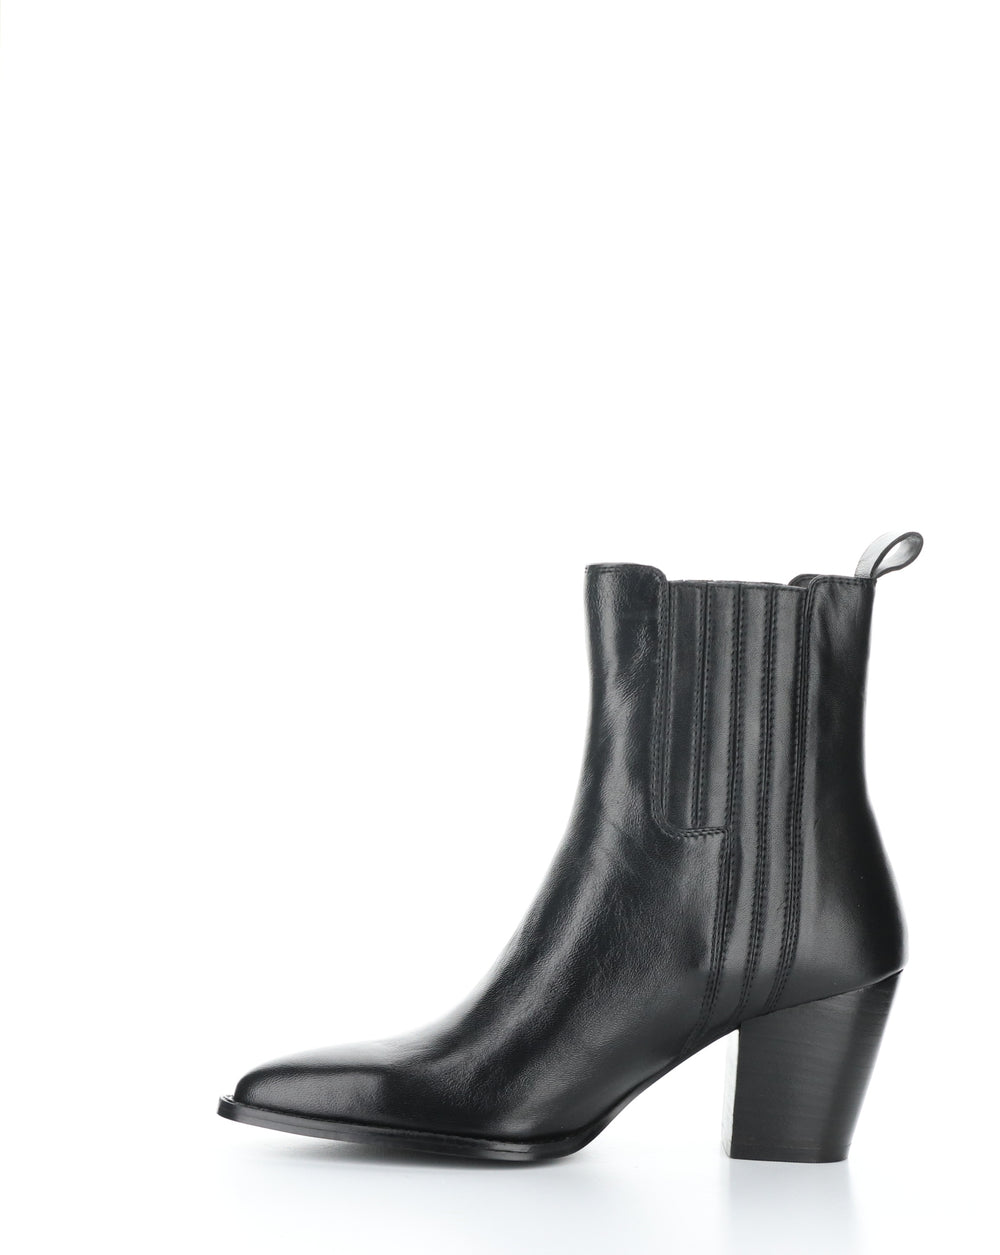 TRULY BLACK Pointed Toe Boots